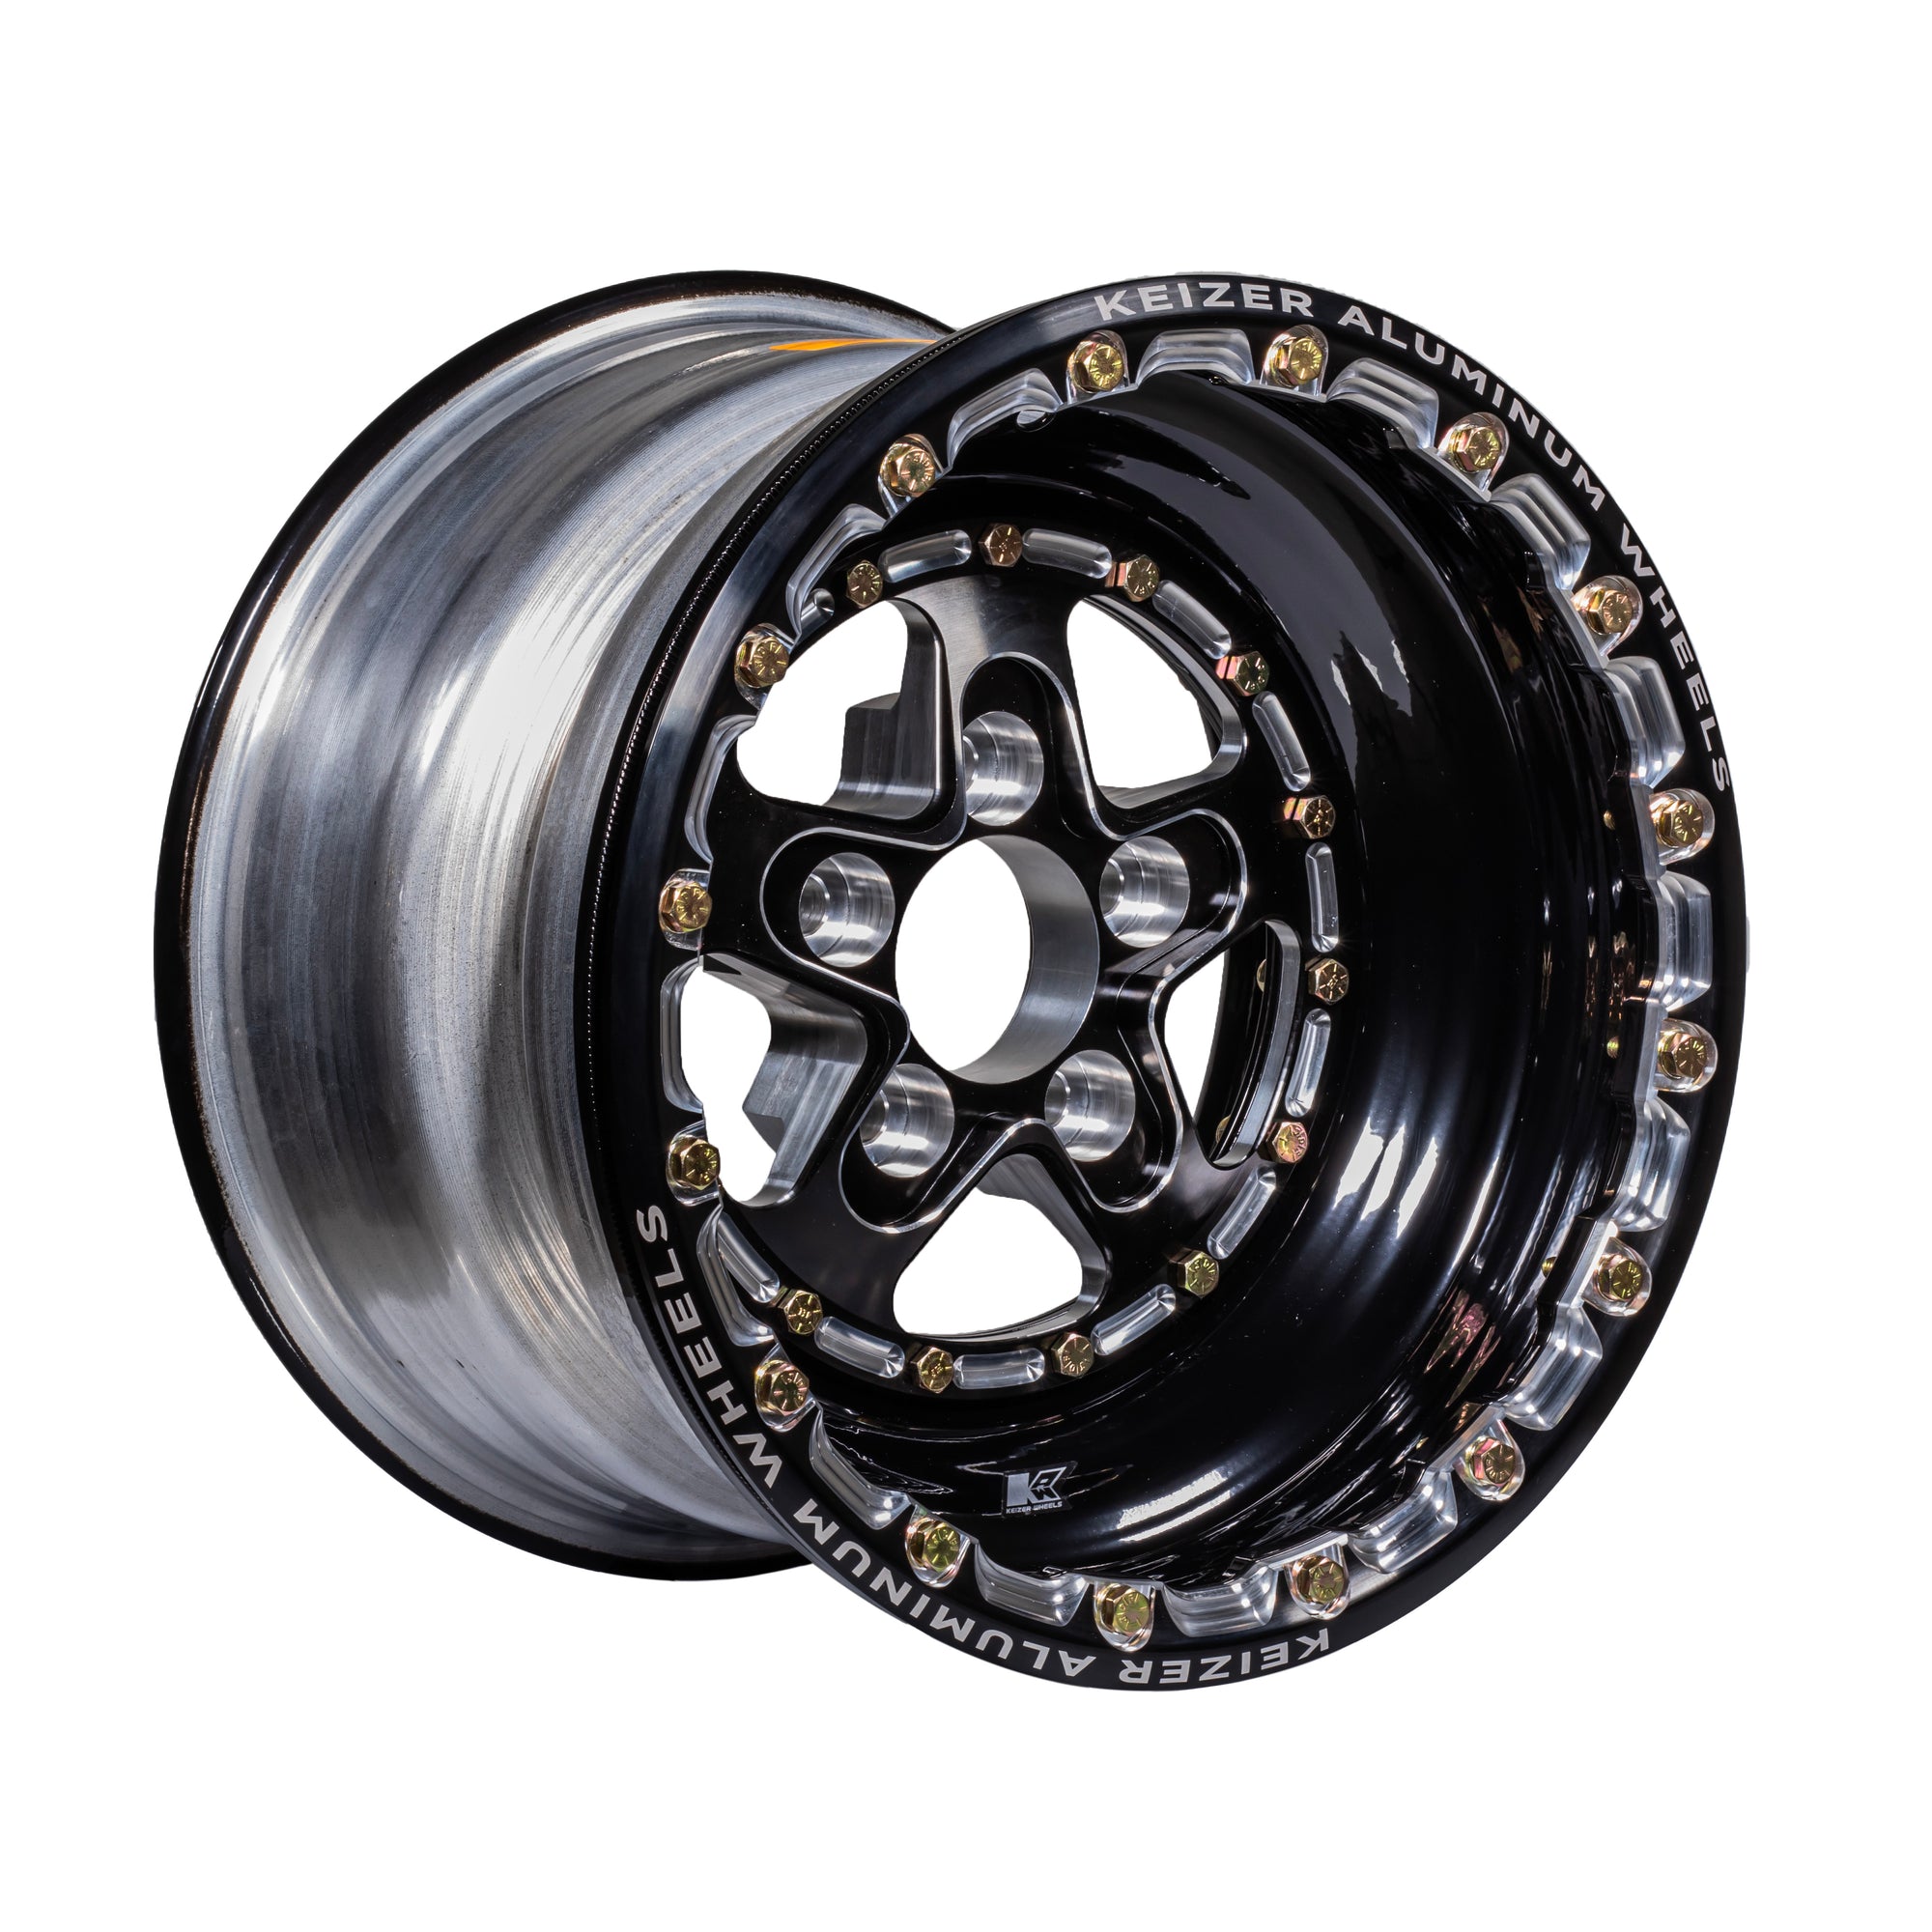 KEIZER FULL HOUSE Synergy (REAR) WHEEL FORGED Raceparts 